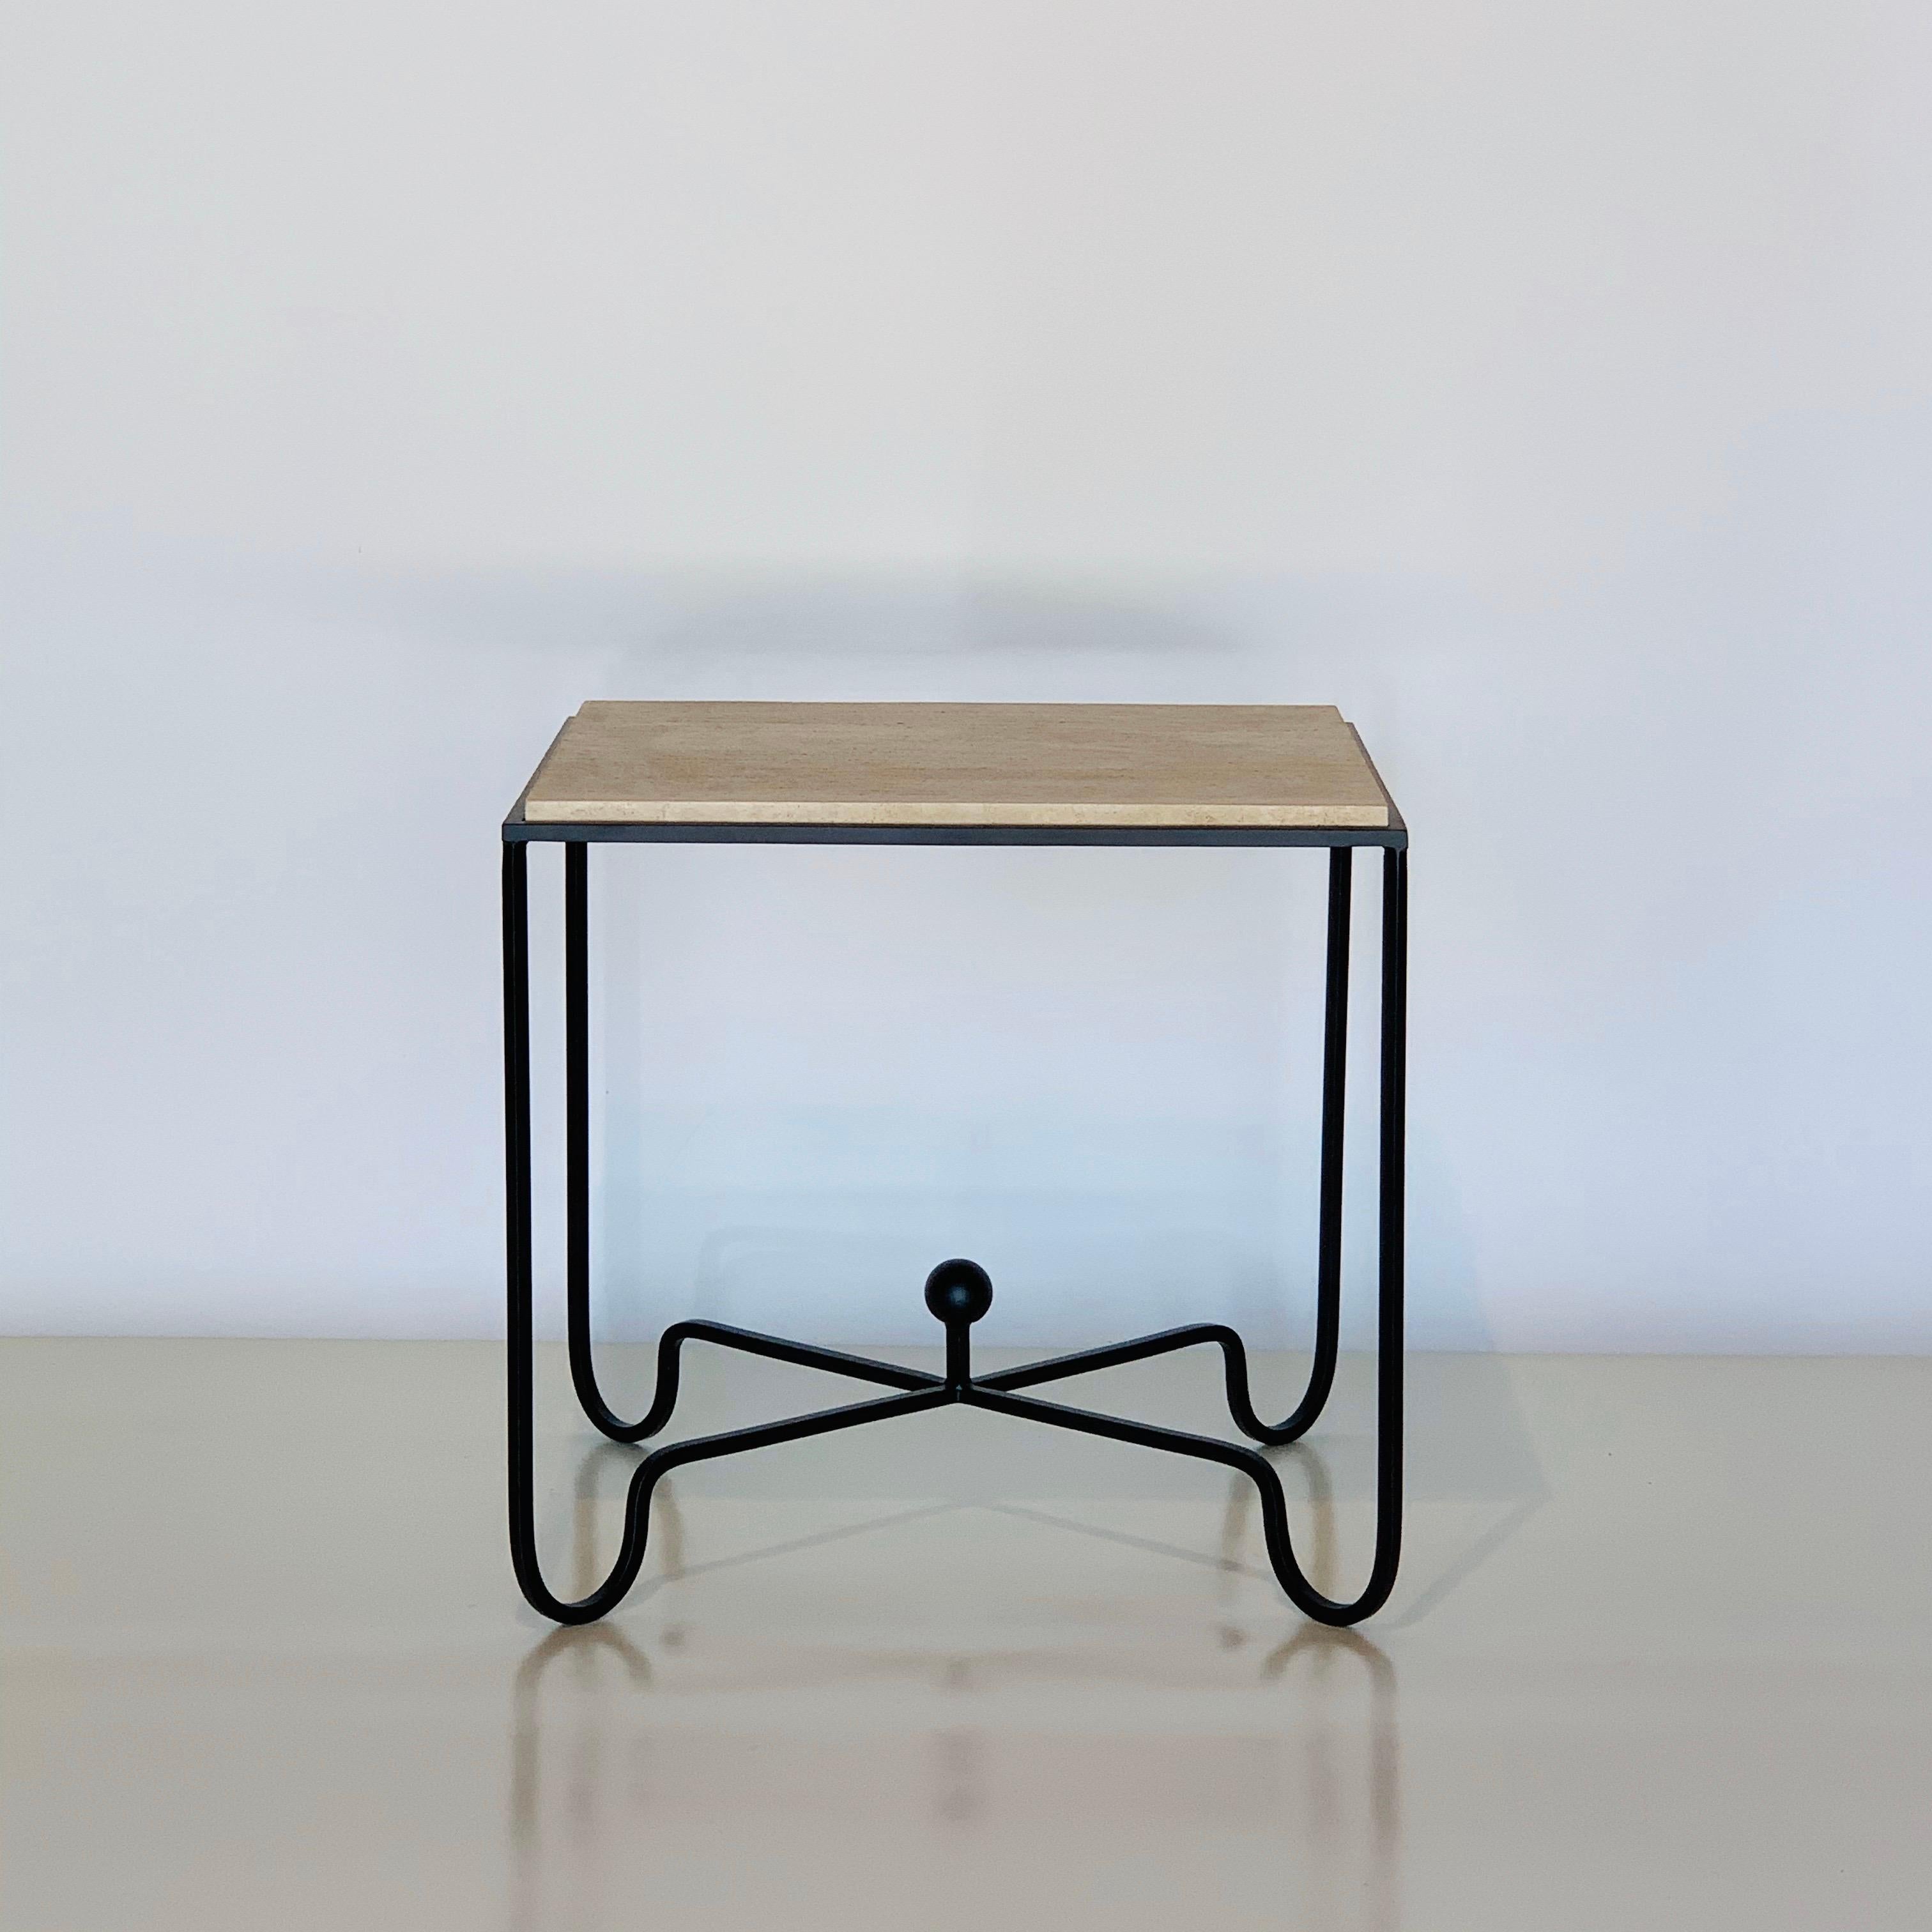 Large iron and travertine 'Entretoise' side table or nightstand by Design Frères.